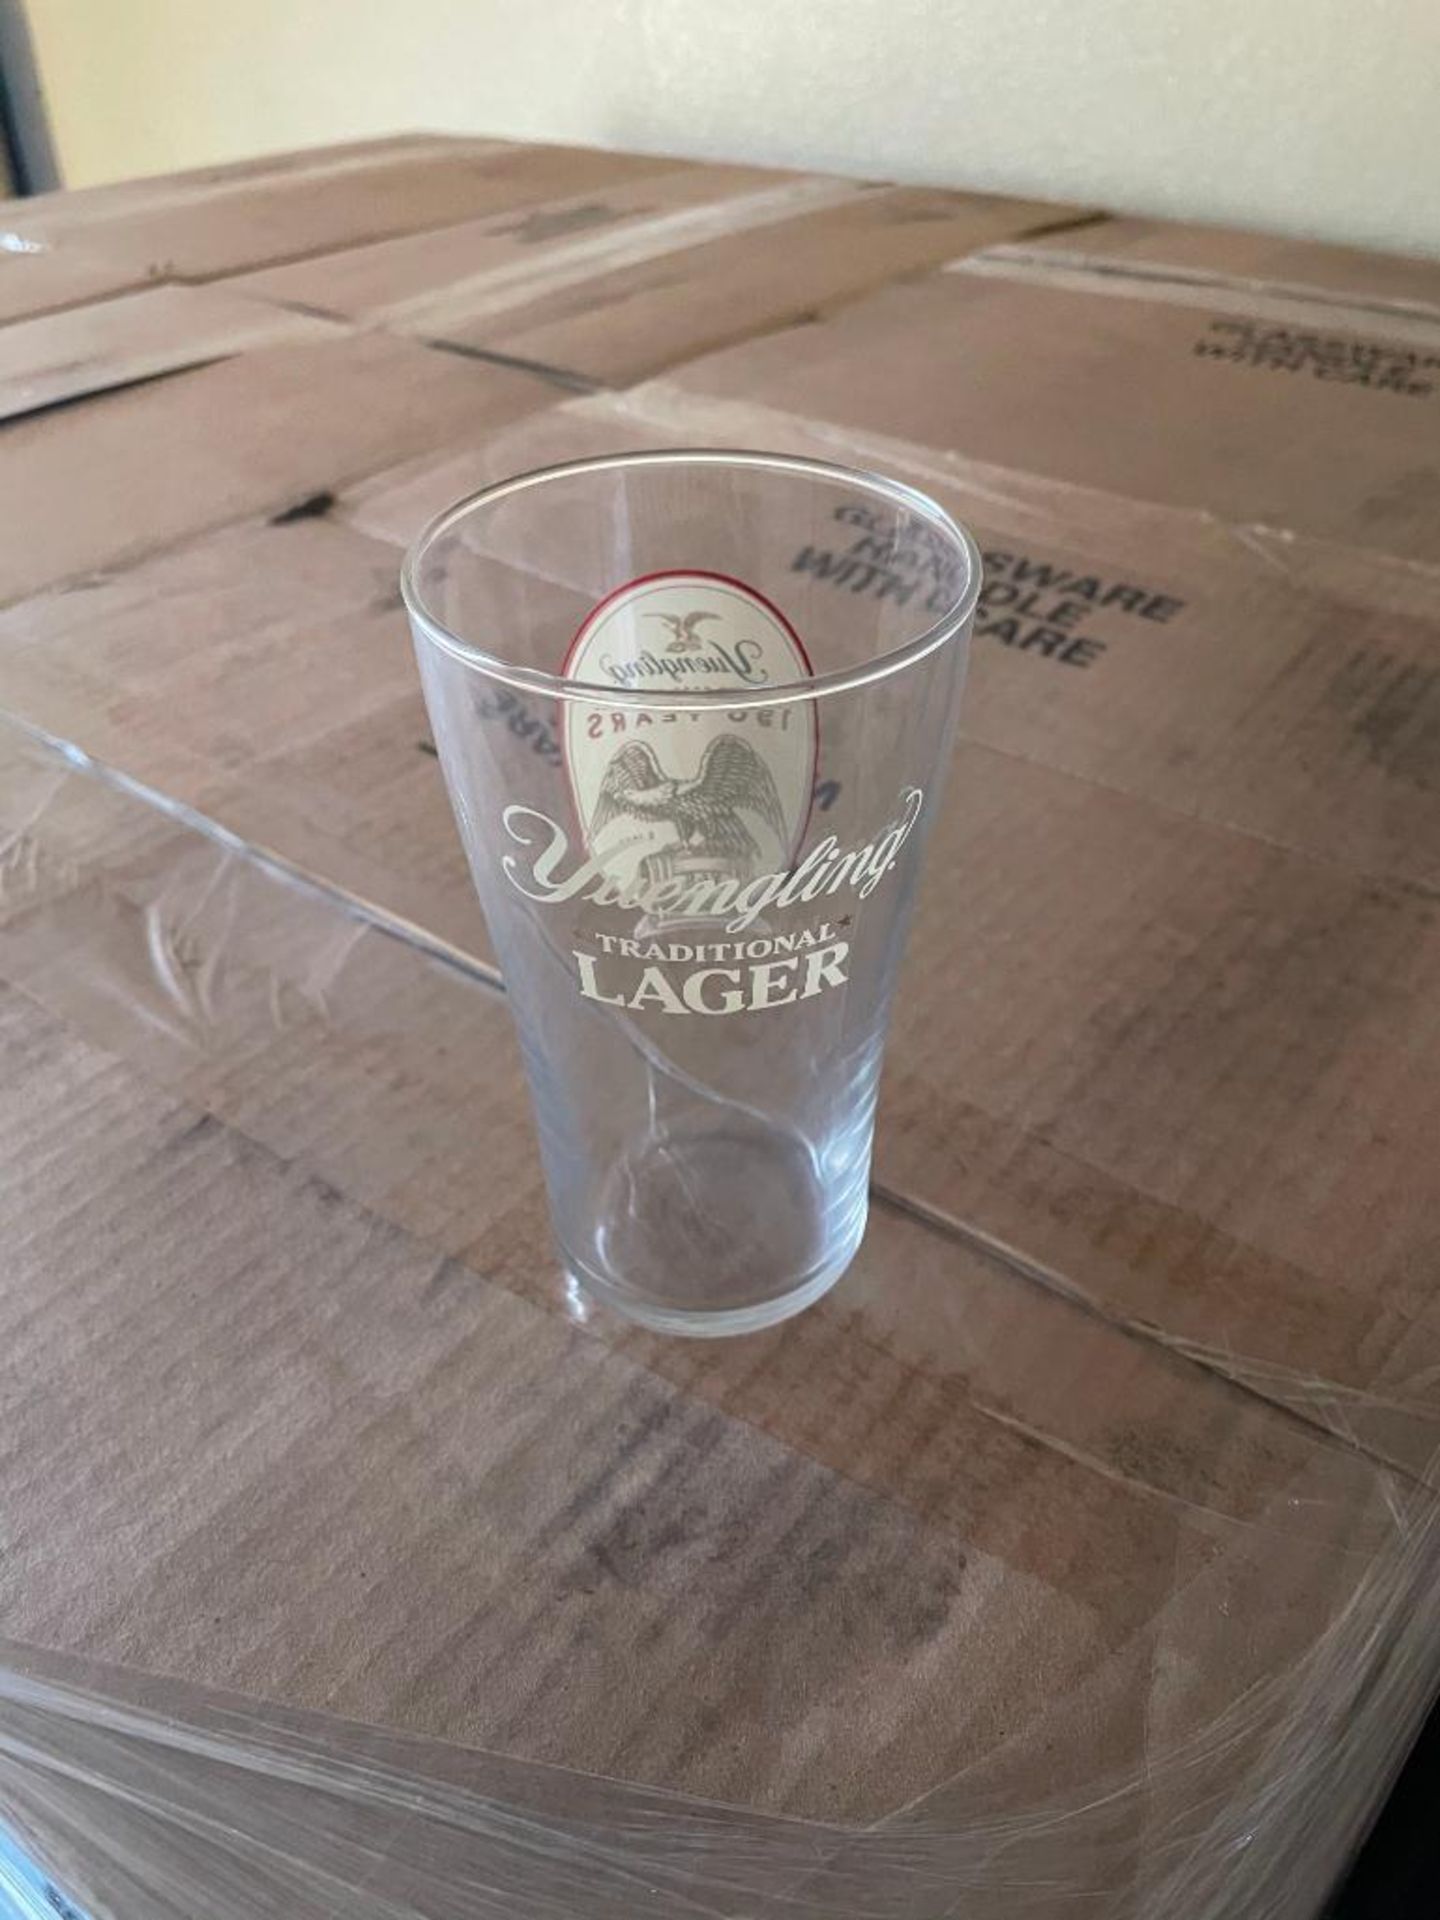 (1,008) YUENGLING TRADITIONAL LAGER 16OZ GLASSES - Image 2 of 2